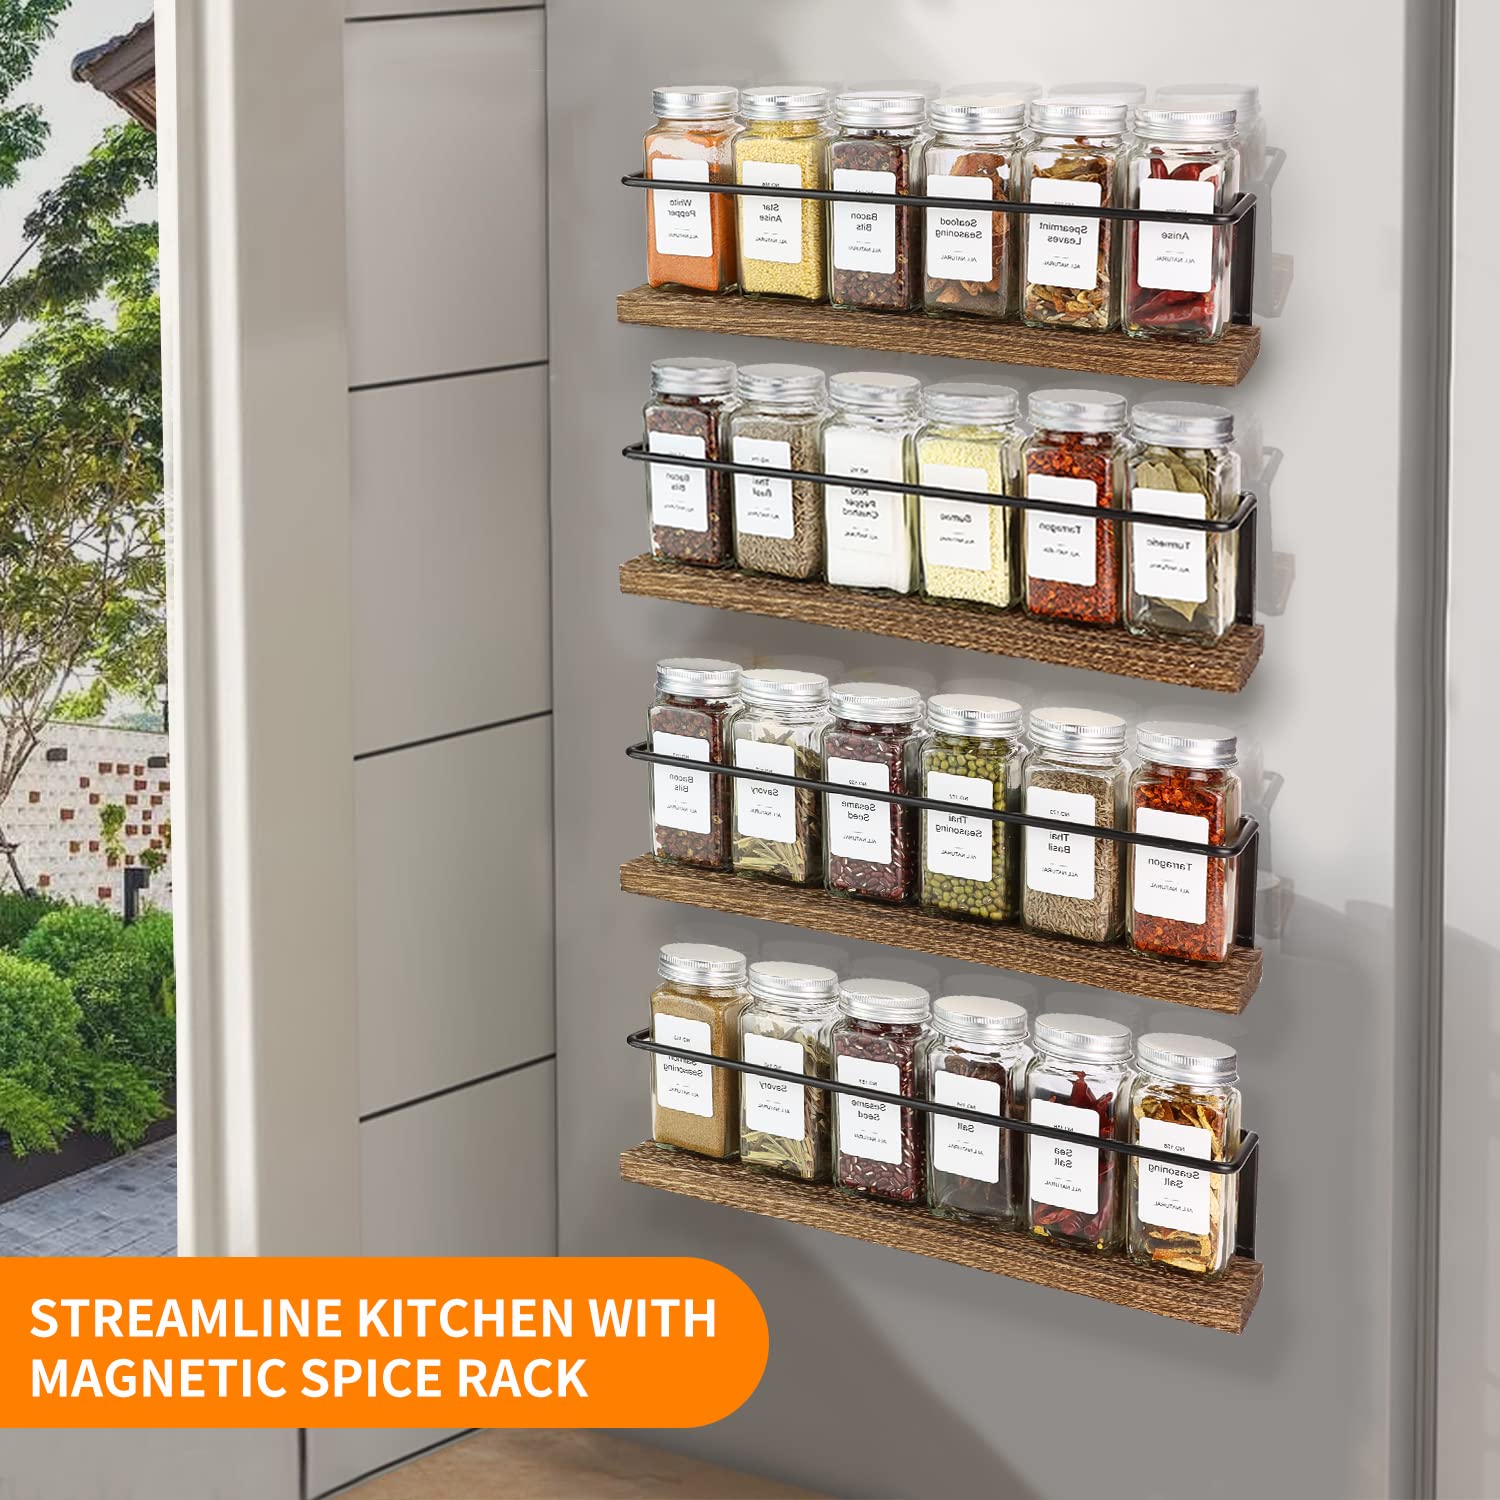 KitHero Magnetic Spice Rack Organizer with 24 Jars, 216 Labels, 1 Steel Funnel for Refrigerator，Microwave Oven - Full Set of Seasoning Organizer